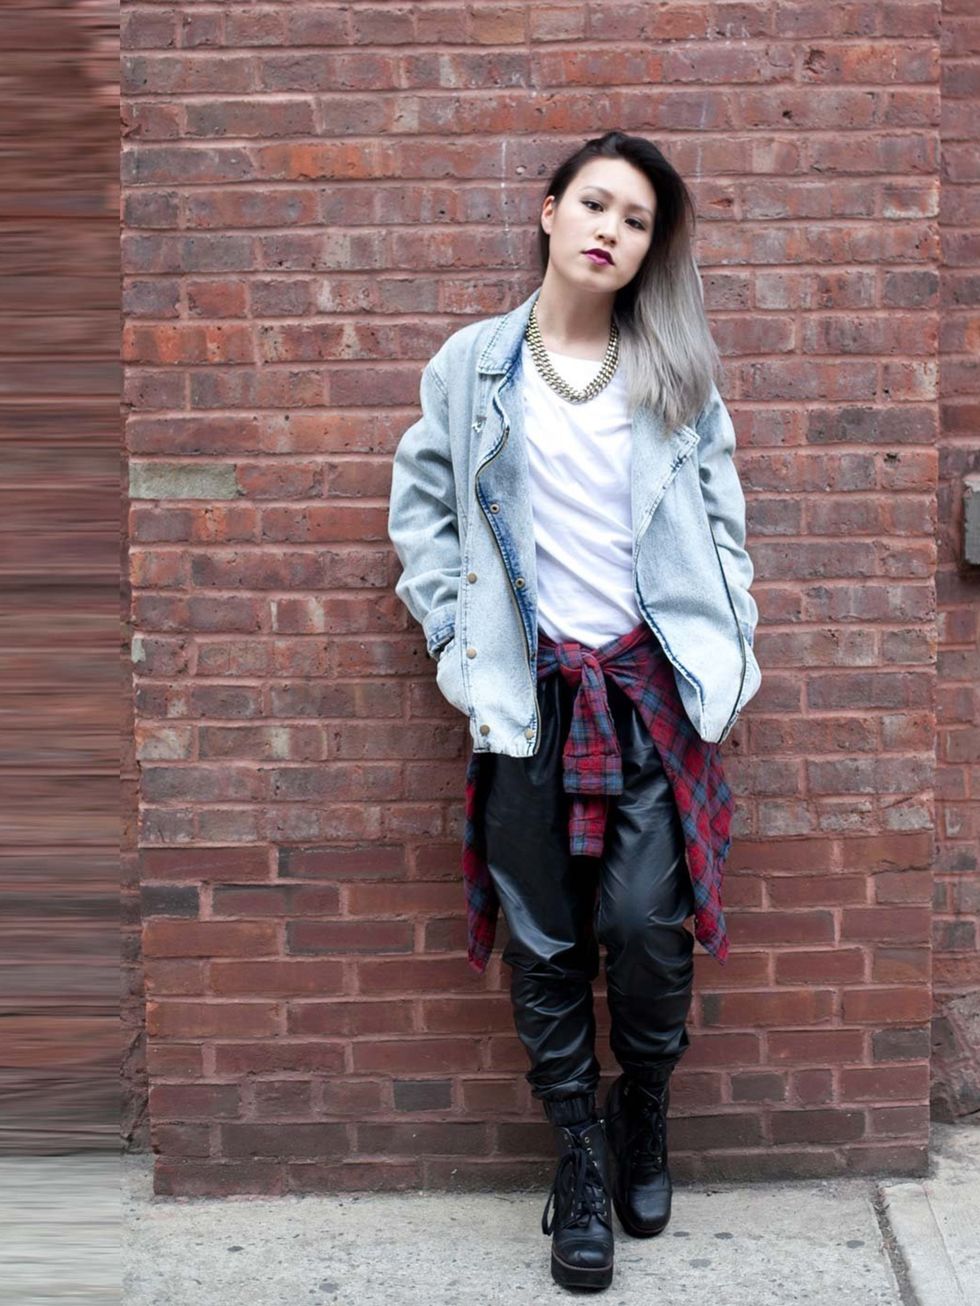 <p>Annie wearing a <a href="http://www.forever21.com/UK/Product/Main.aspx?br=f21">Forever 21</a> jacket and tartan shirt with an <a href="http://www.asos.com/Women/">Asos</a> top, <a href="http://www.urbanoutfitters.co.uk/">Urban Outfitters</a> trousers, 